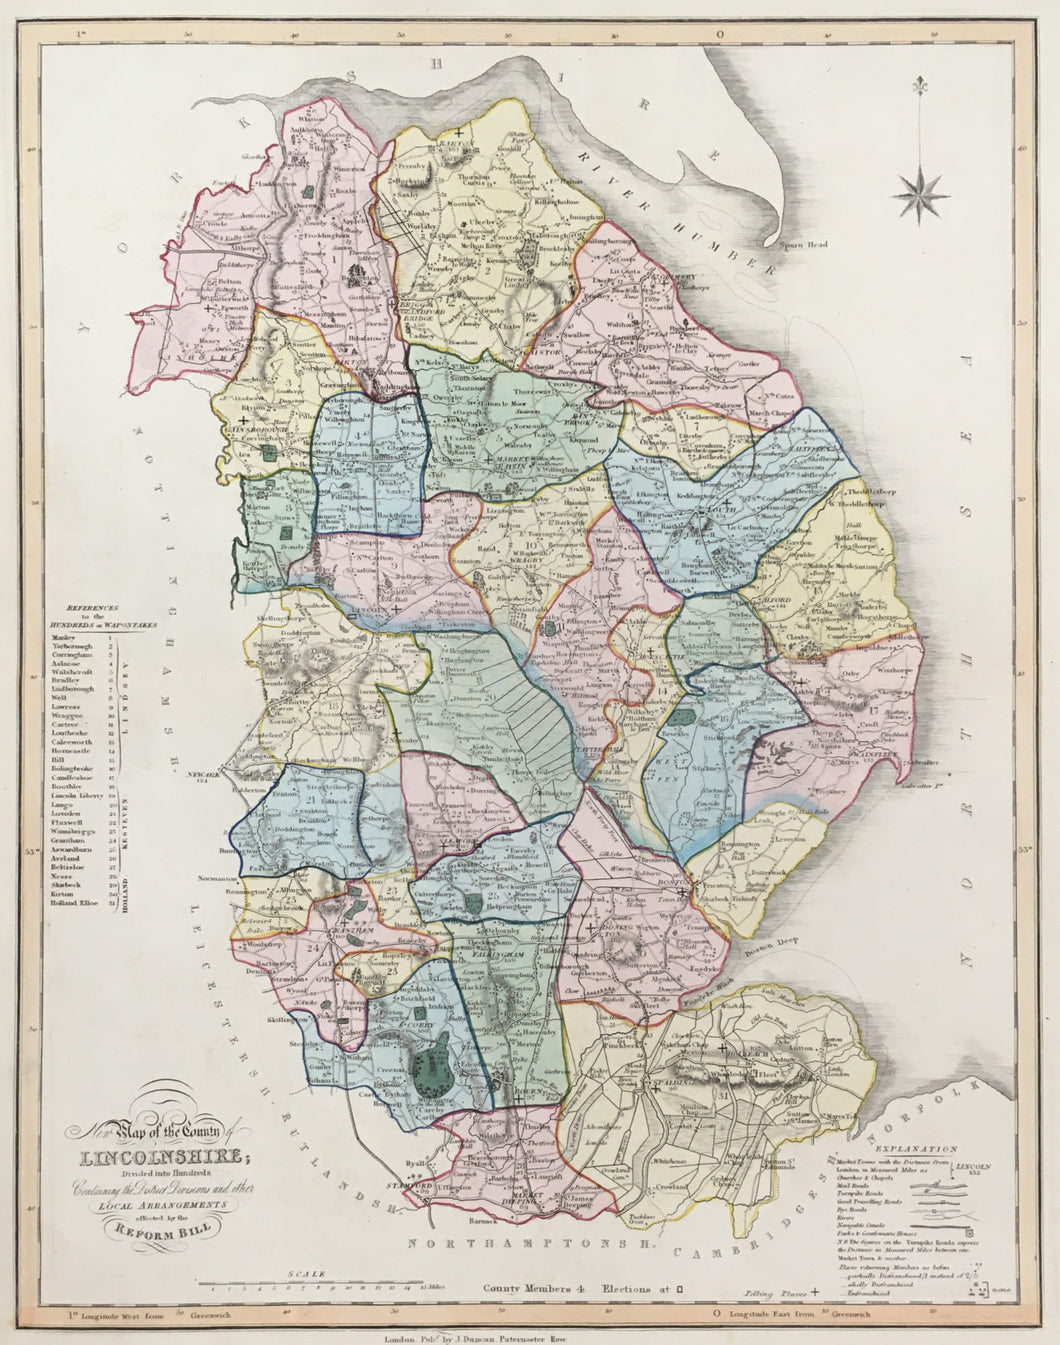 Ebden, William “New Map of the County of Lincolnshire.”